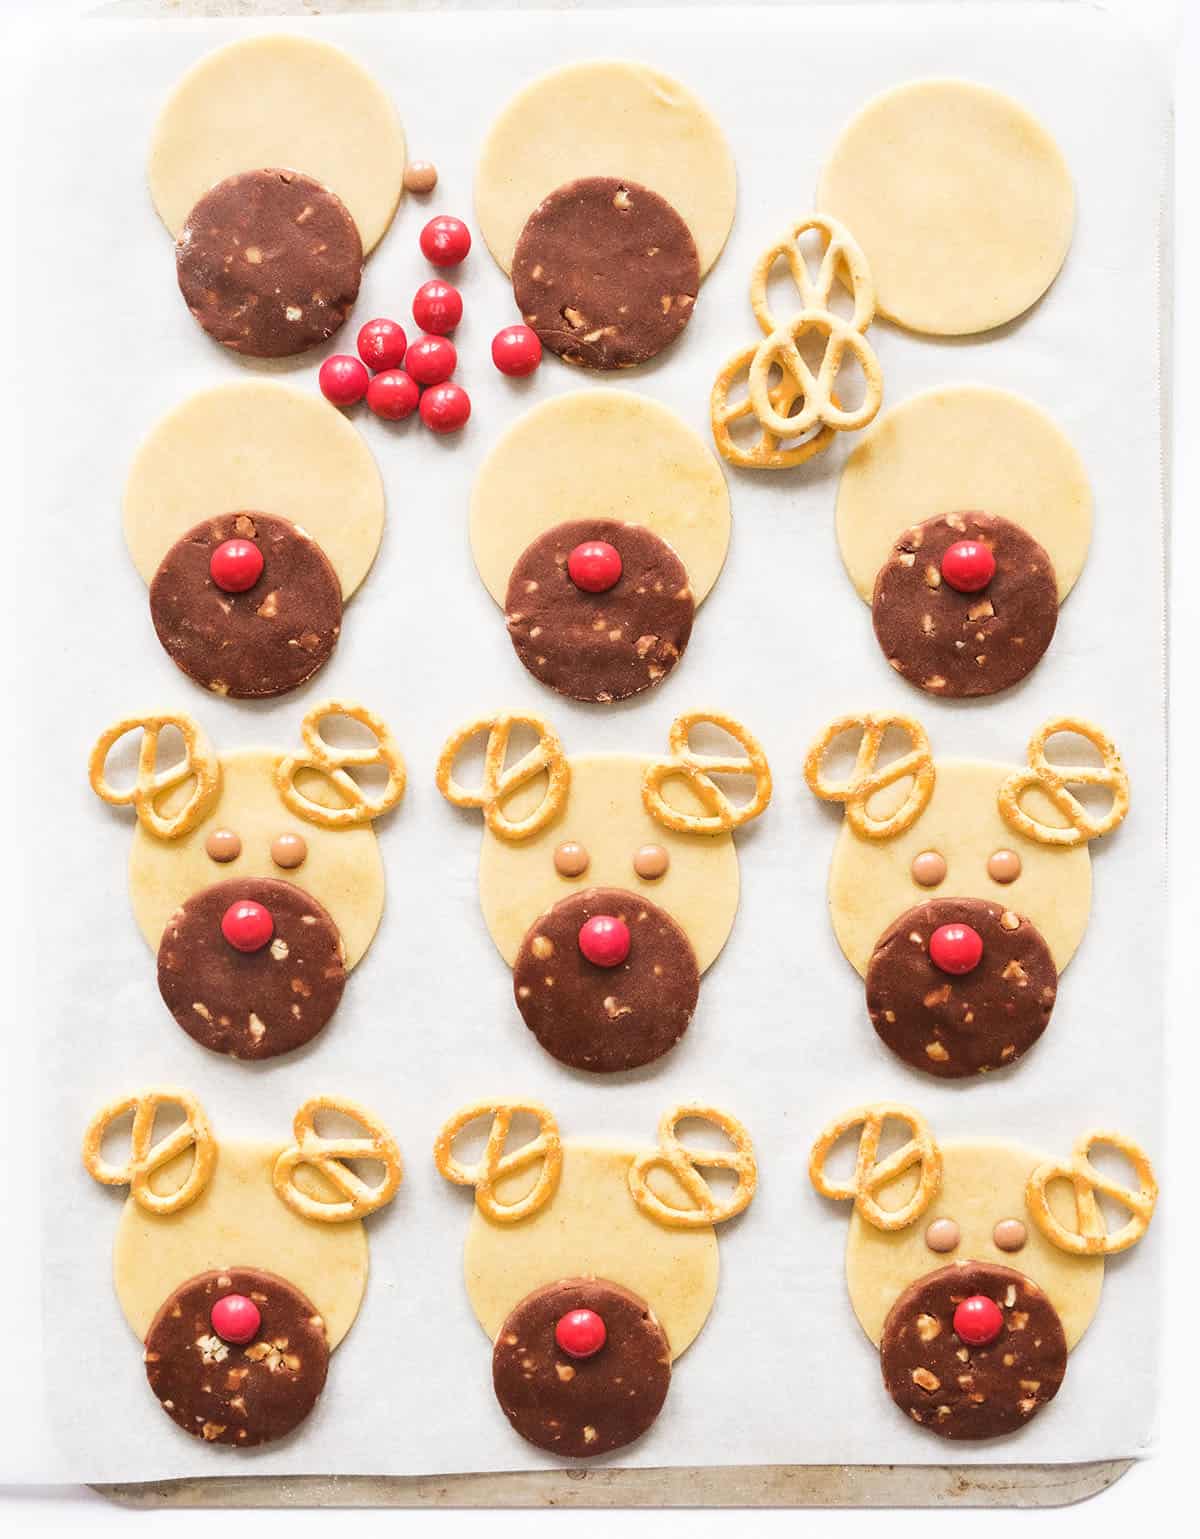 Top view of a baking sheet showing how to assemble the reindeer cookies.